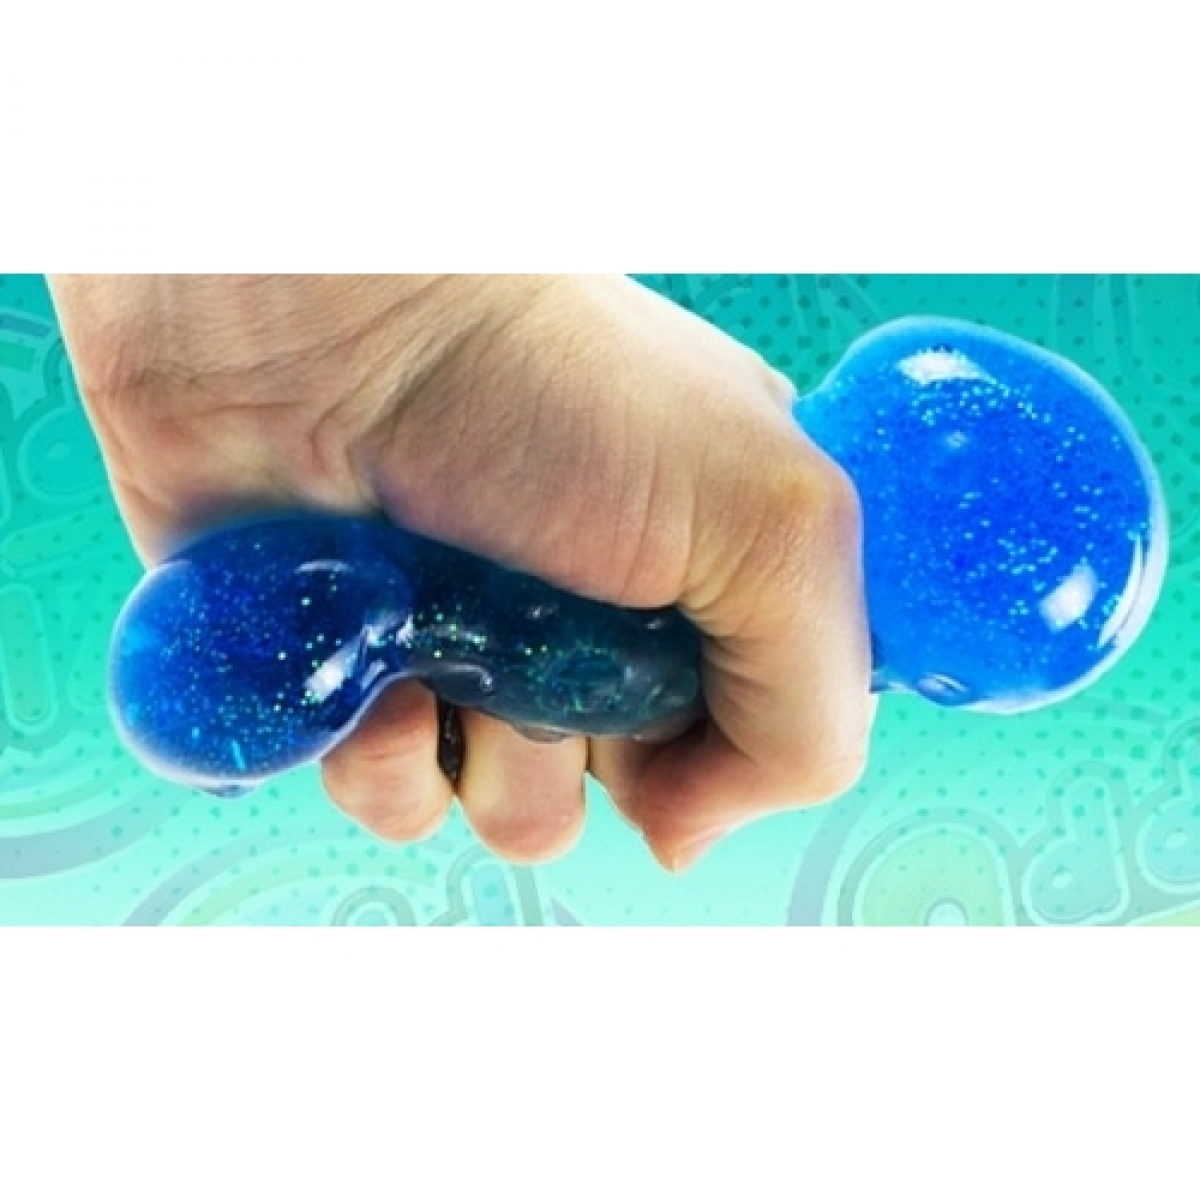 Details about   1/4pcs Squish Sensory stress reliever ball toy autism squeeze anxiety fidget UK 